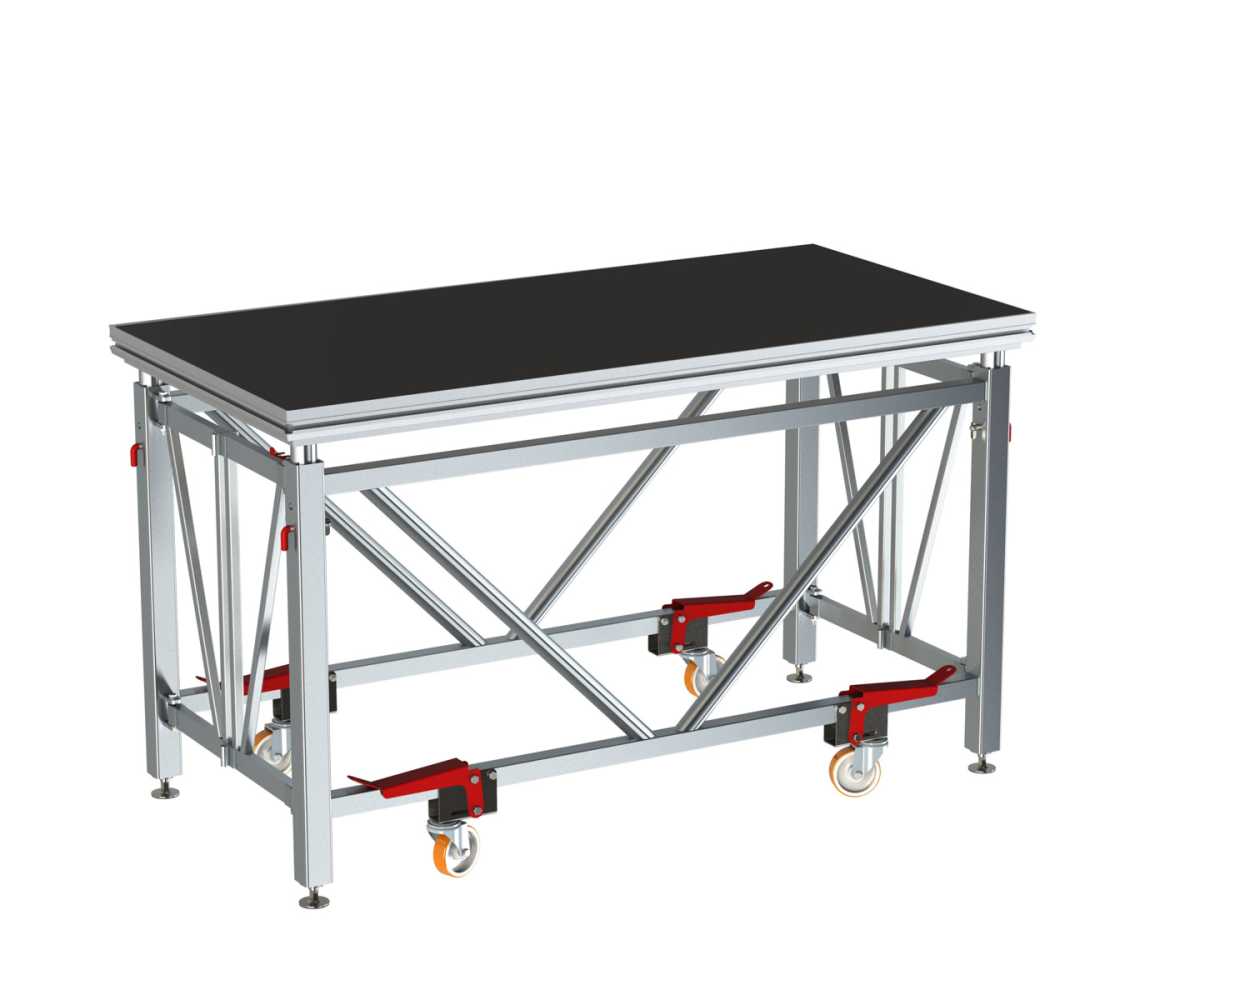 The system offers the ability to build the stage and rig at the same time